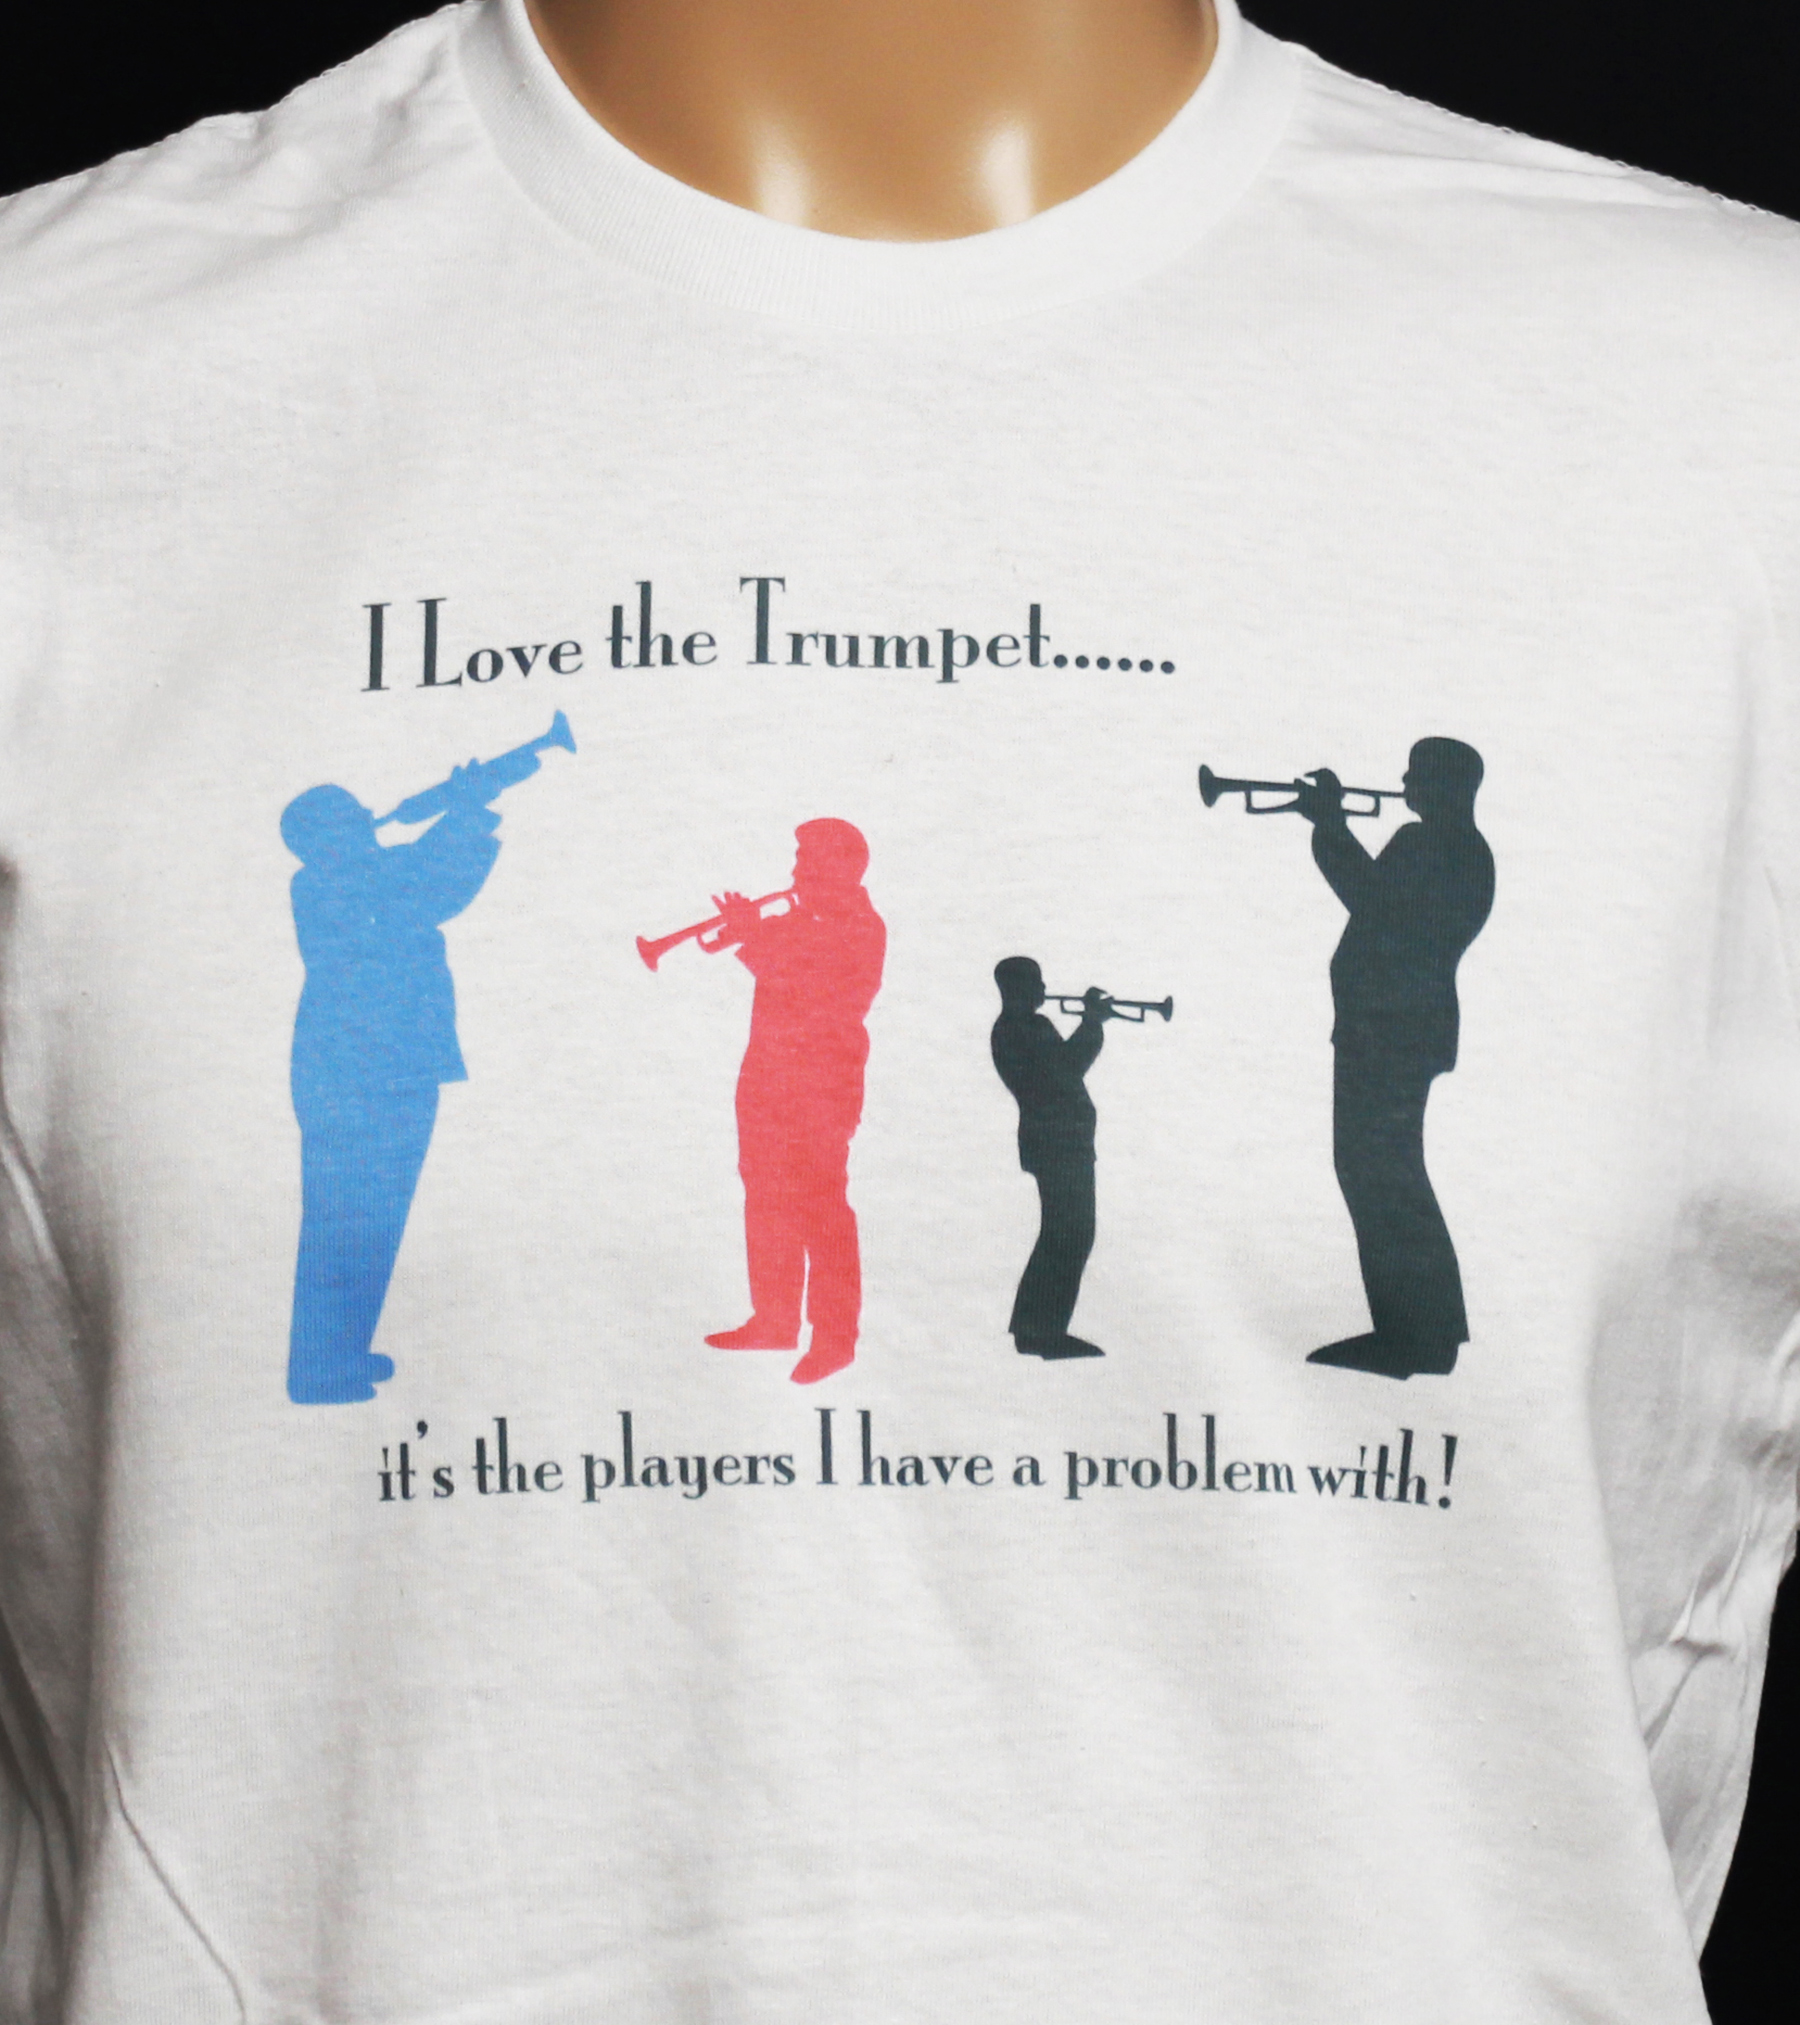 I Love the Trumpet... it's the players I have a problem with!